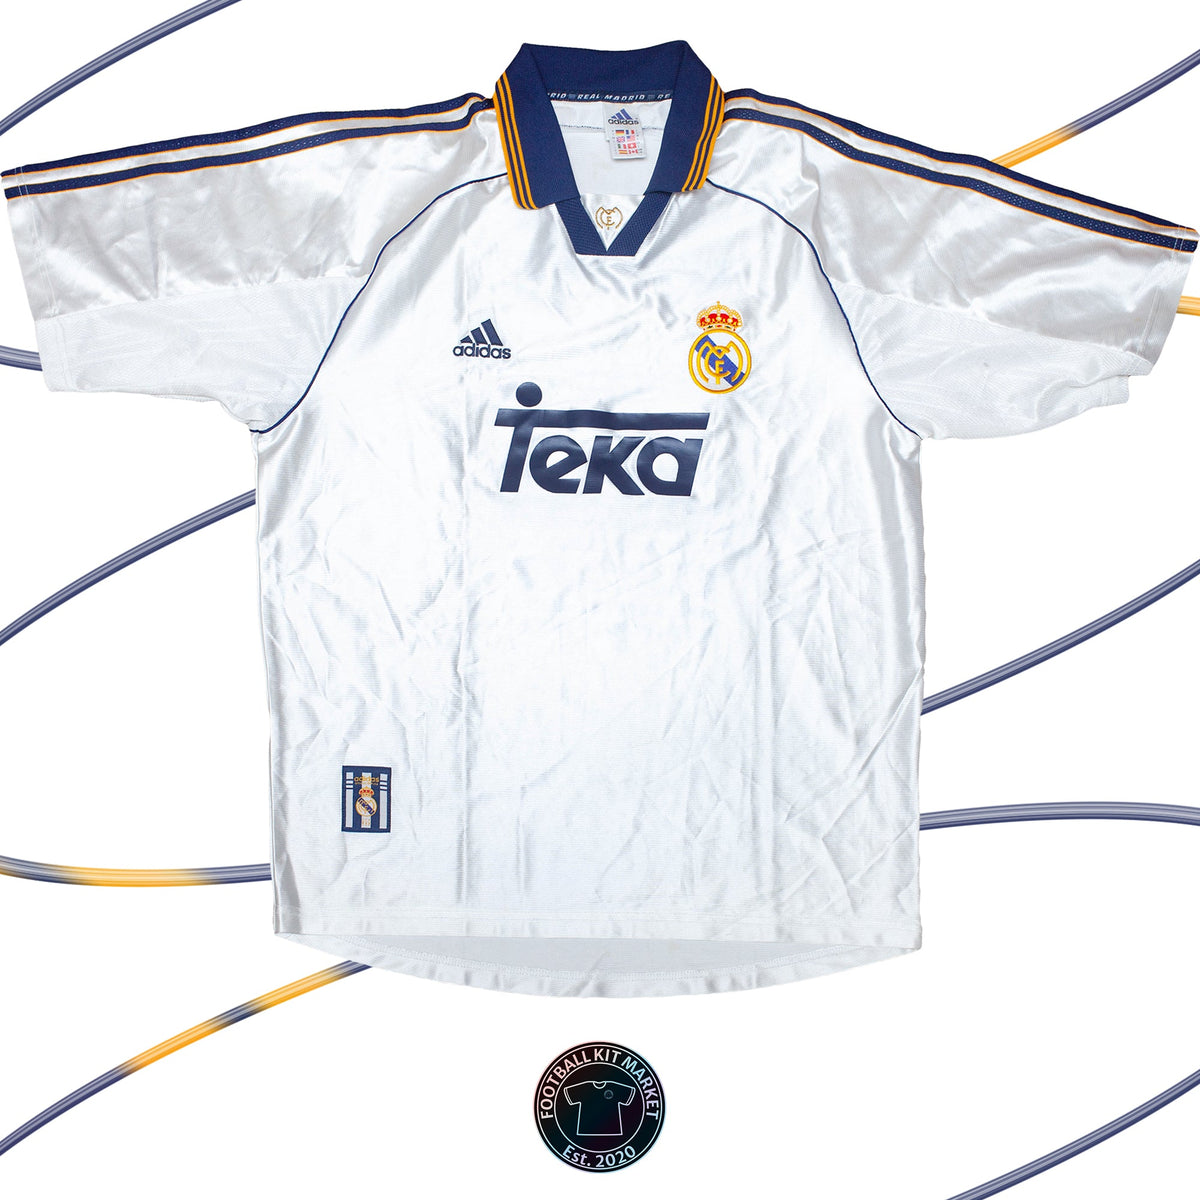 Genuine REAL MADRID Home (1999-2000) - ADIDAS (L) - Product Image from Football Kit Market